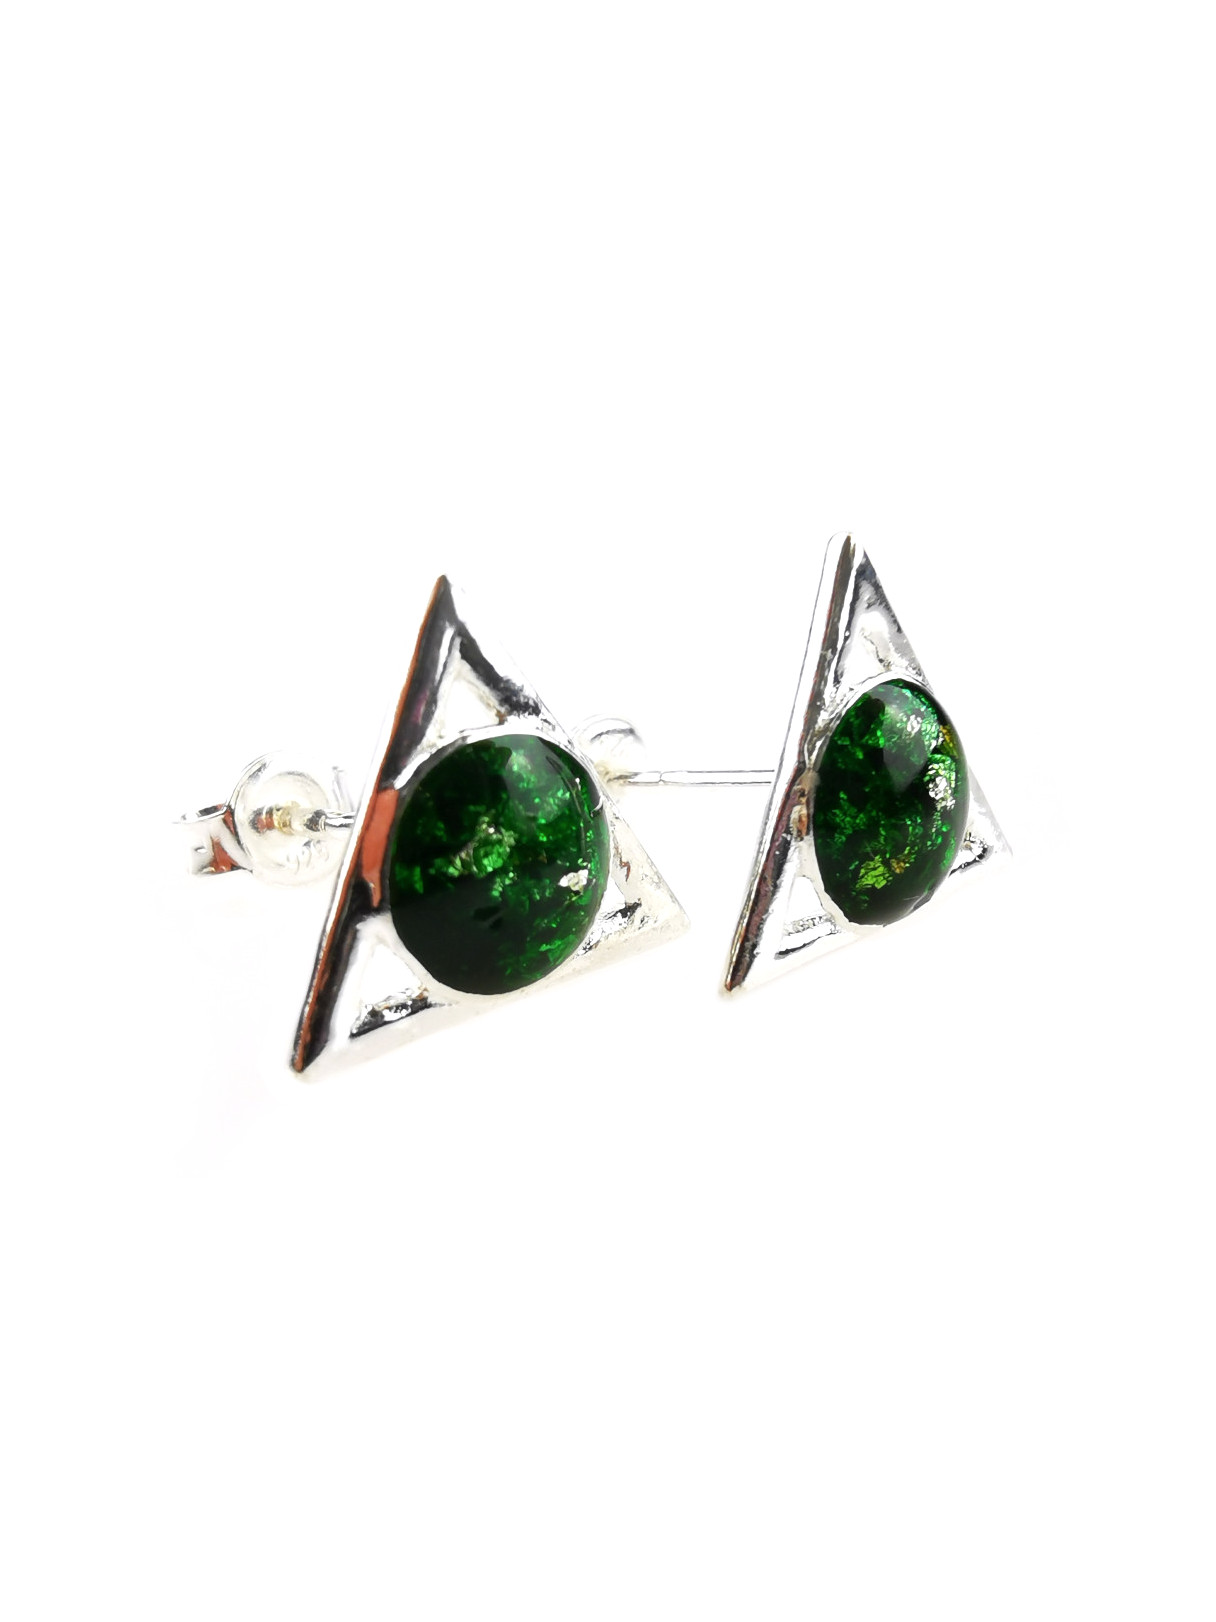 Green Triangle Orgone Crystal Earrings by OrgoneVibes